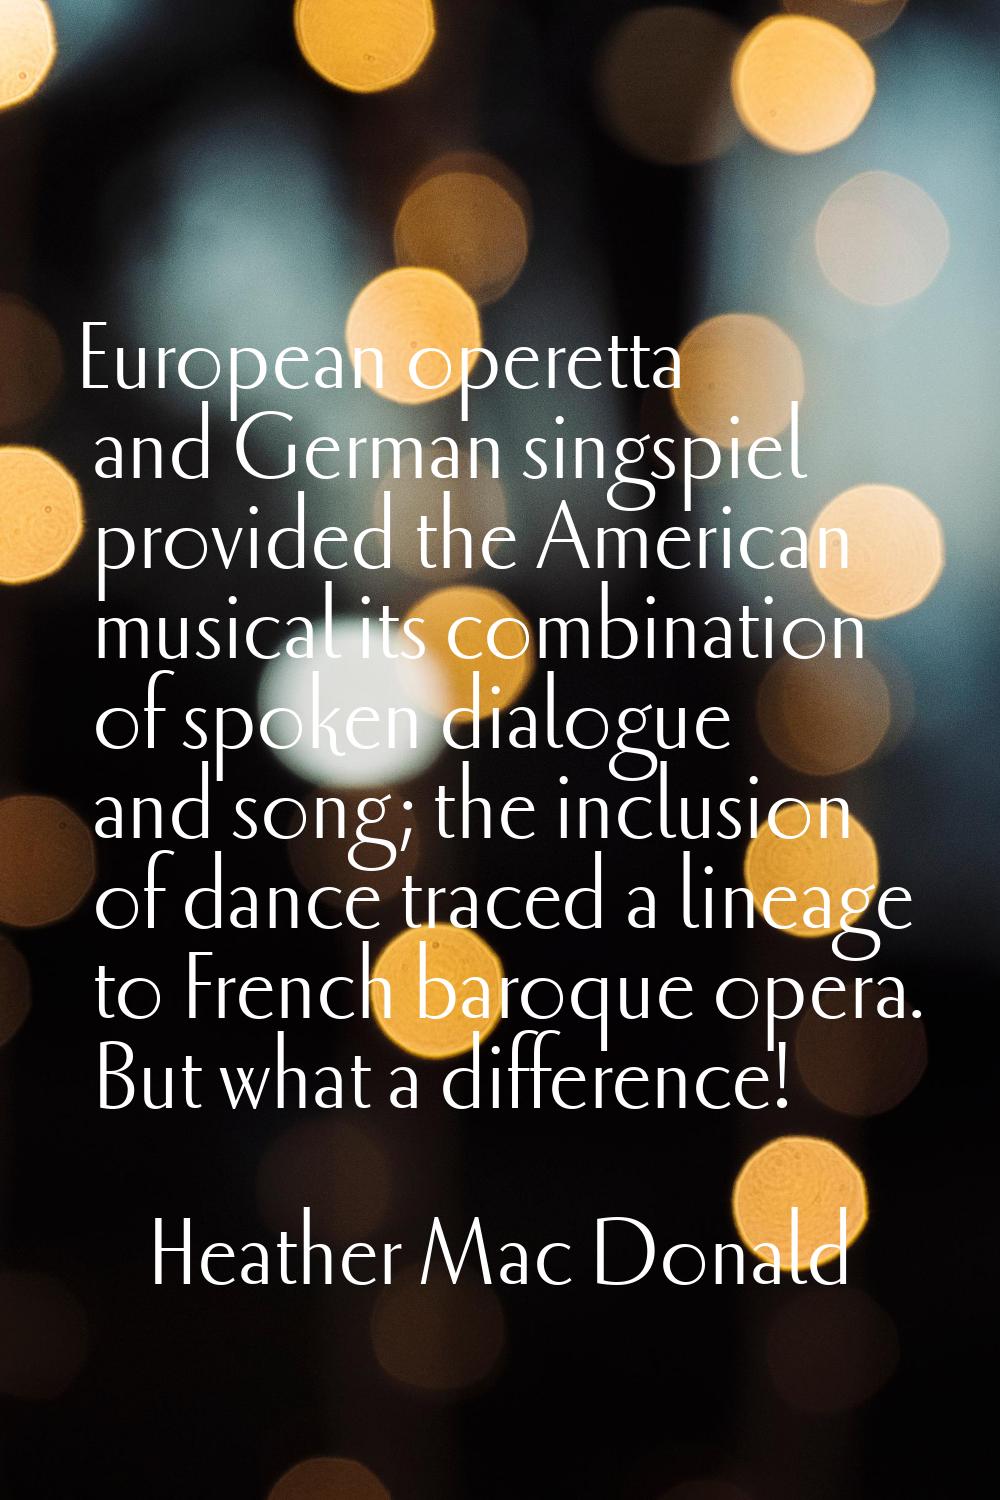 European operetta and German singspiel provided the American musical its combination of spoken dial